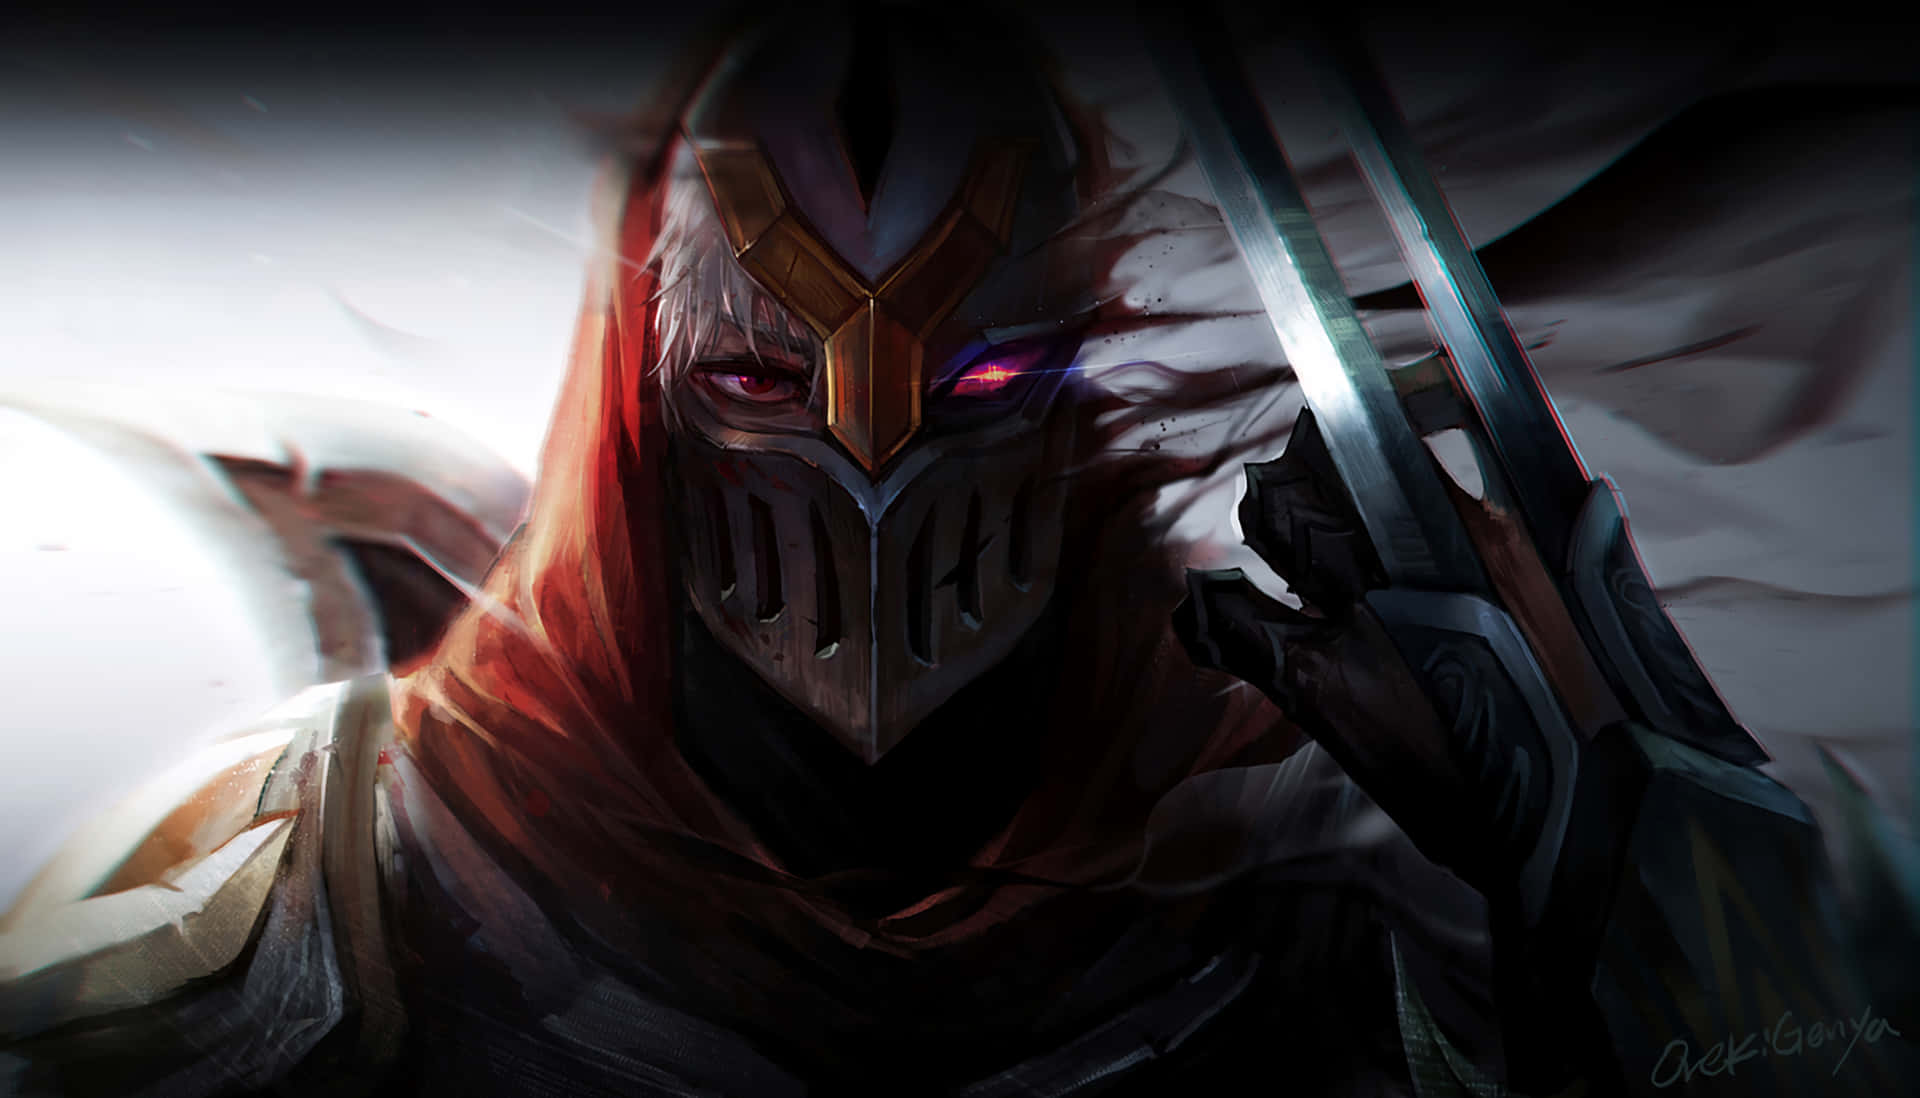 Get Ready For Epic Battles in League of Legends Wallpaper